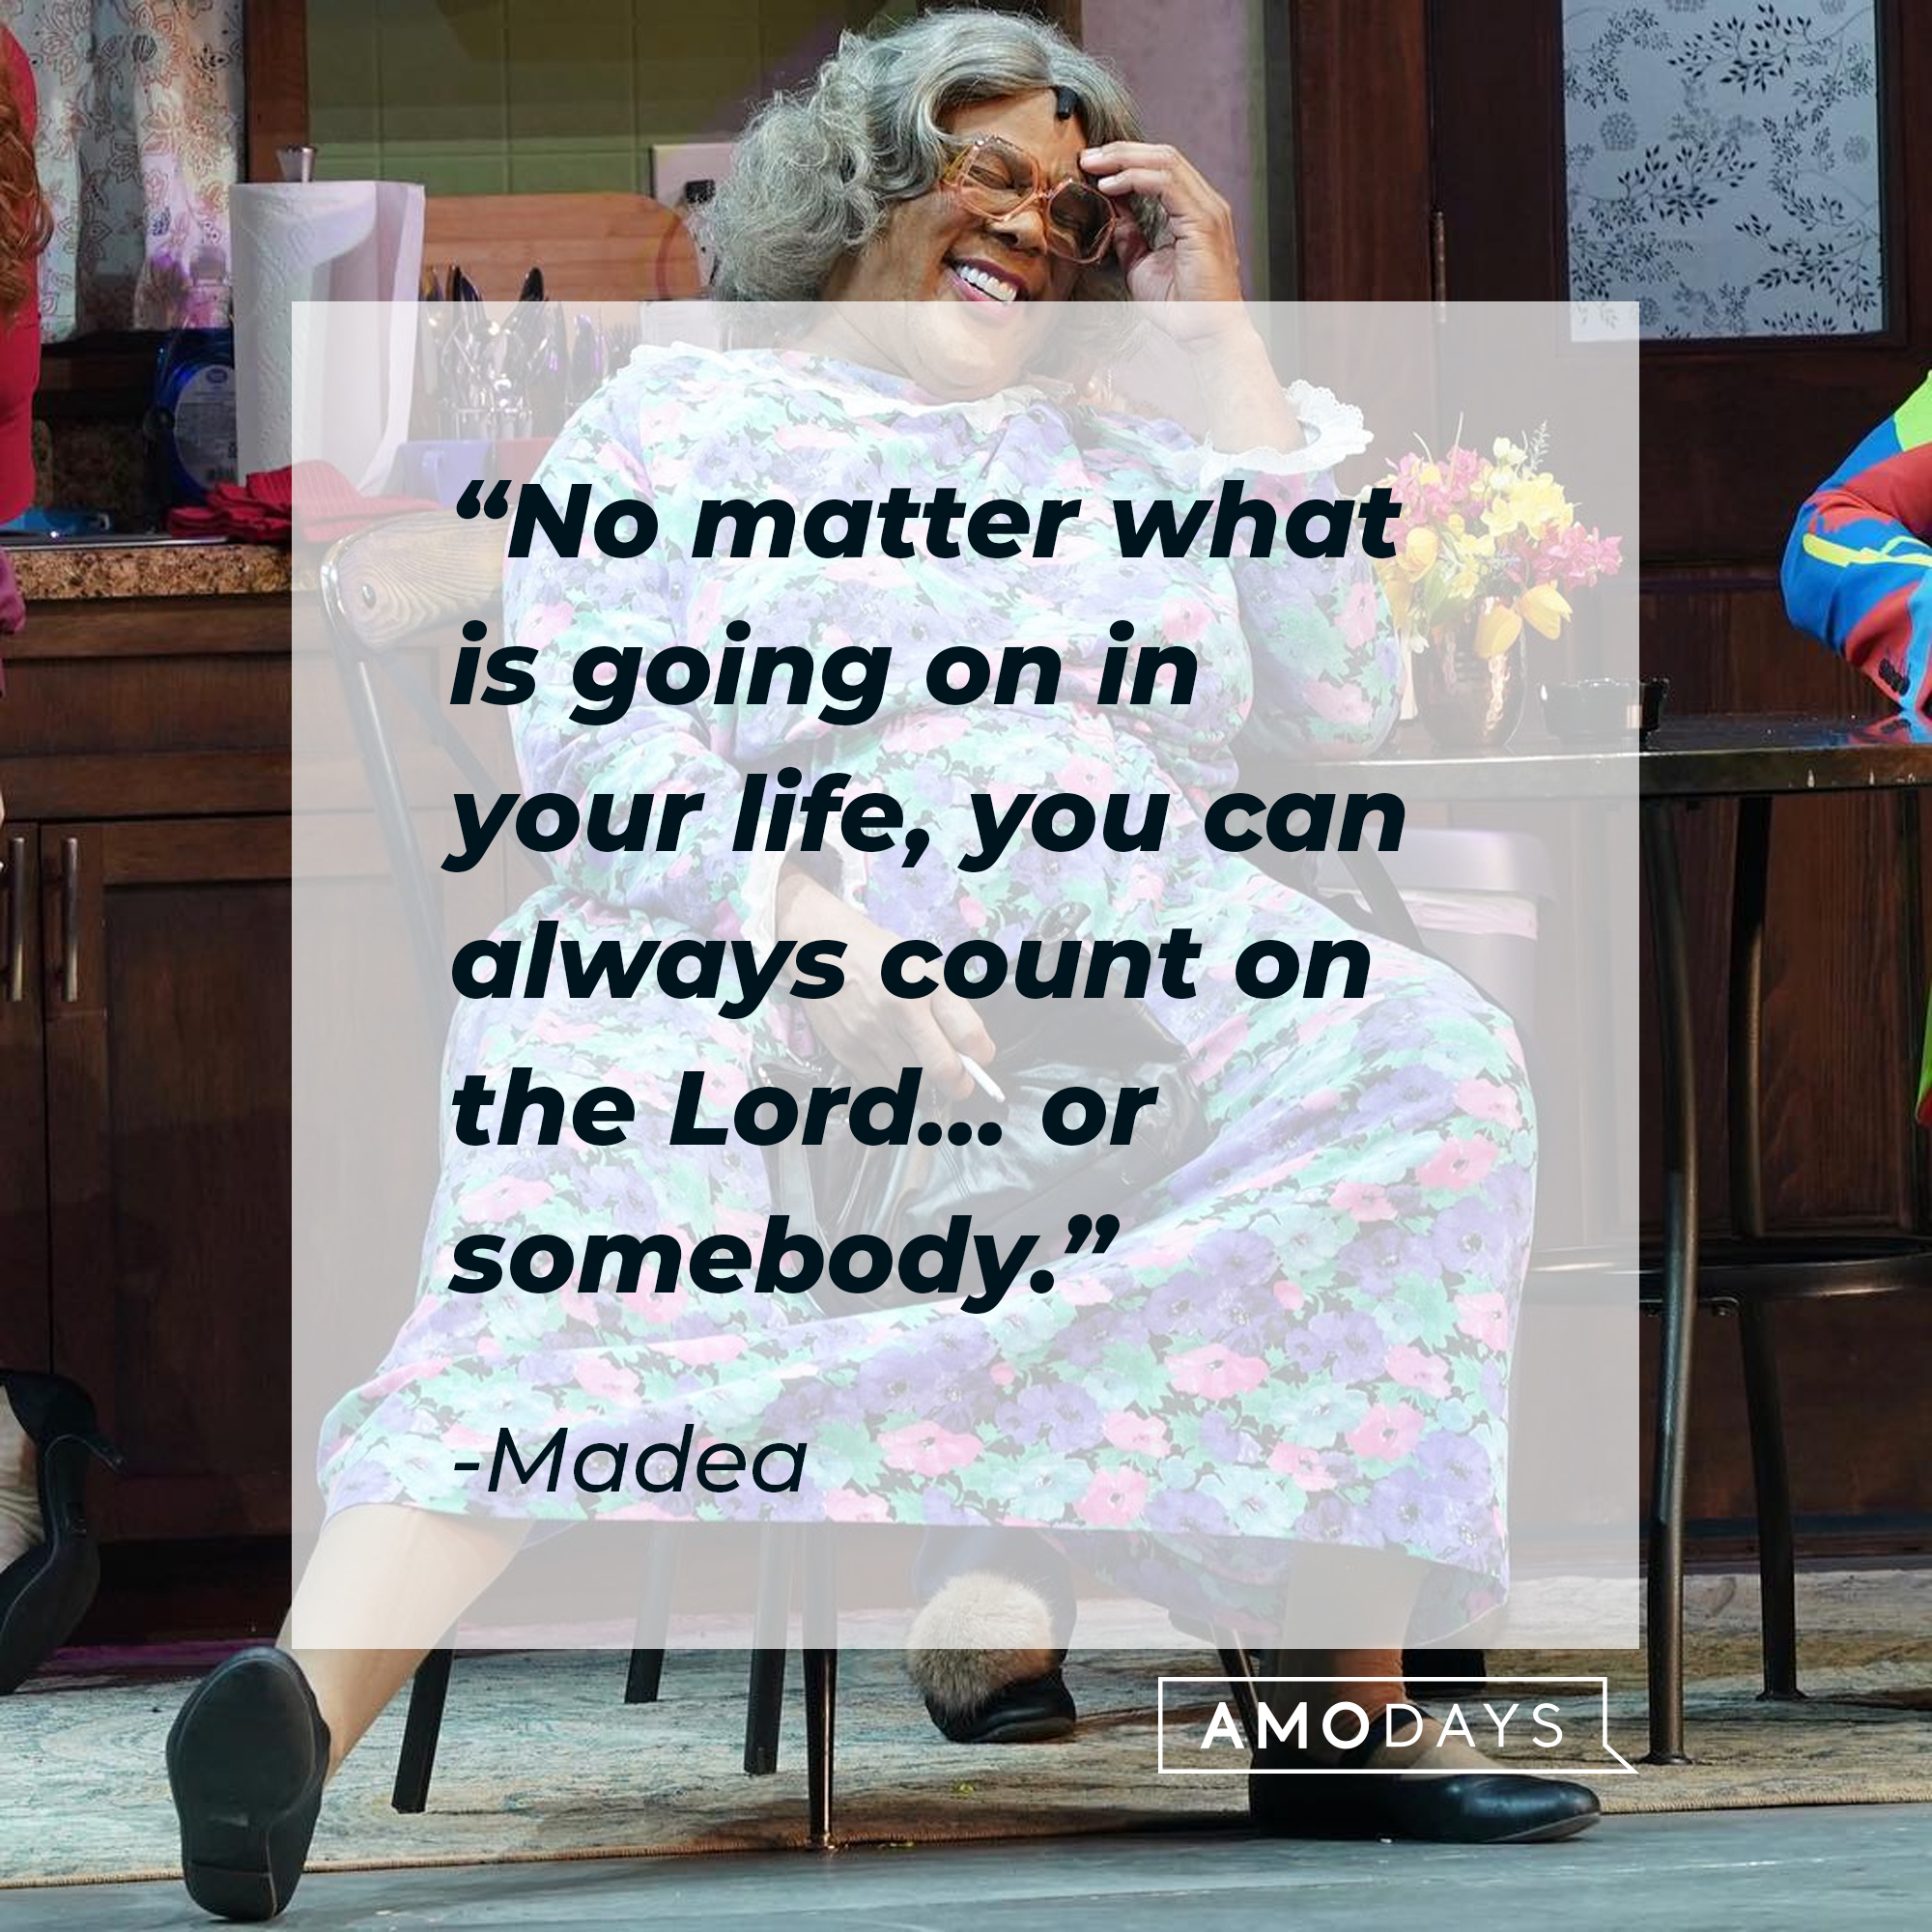 Madea's quote: "No matter what is going on in your life, you can always count on the Lord… or somebody." | Source: Facebook.com/madea